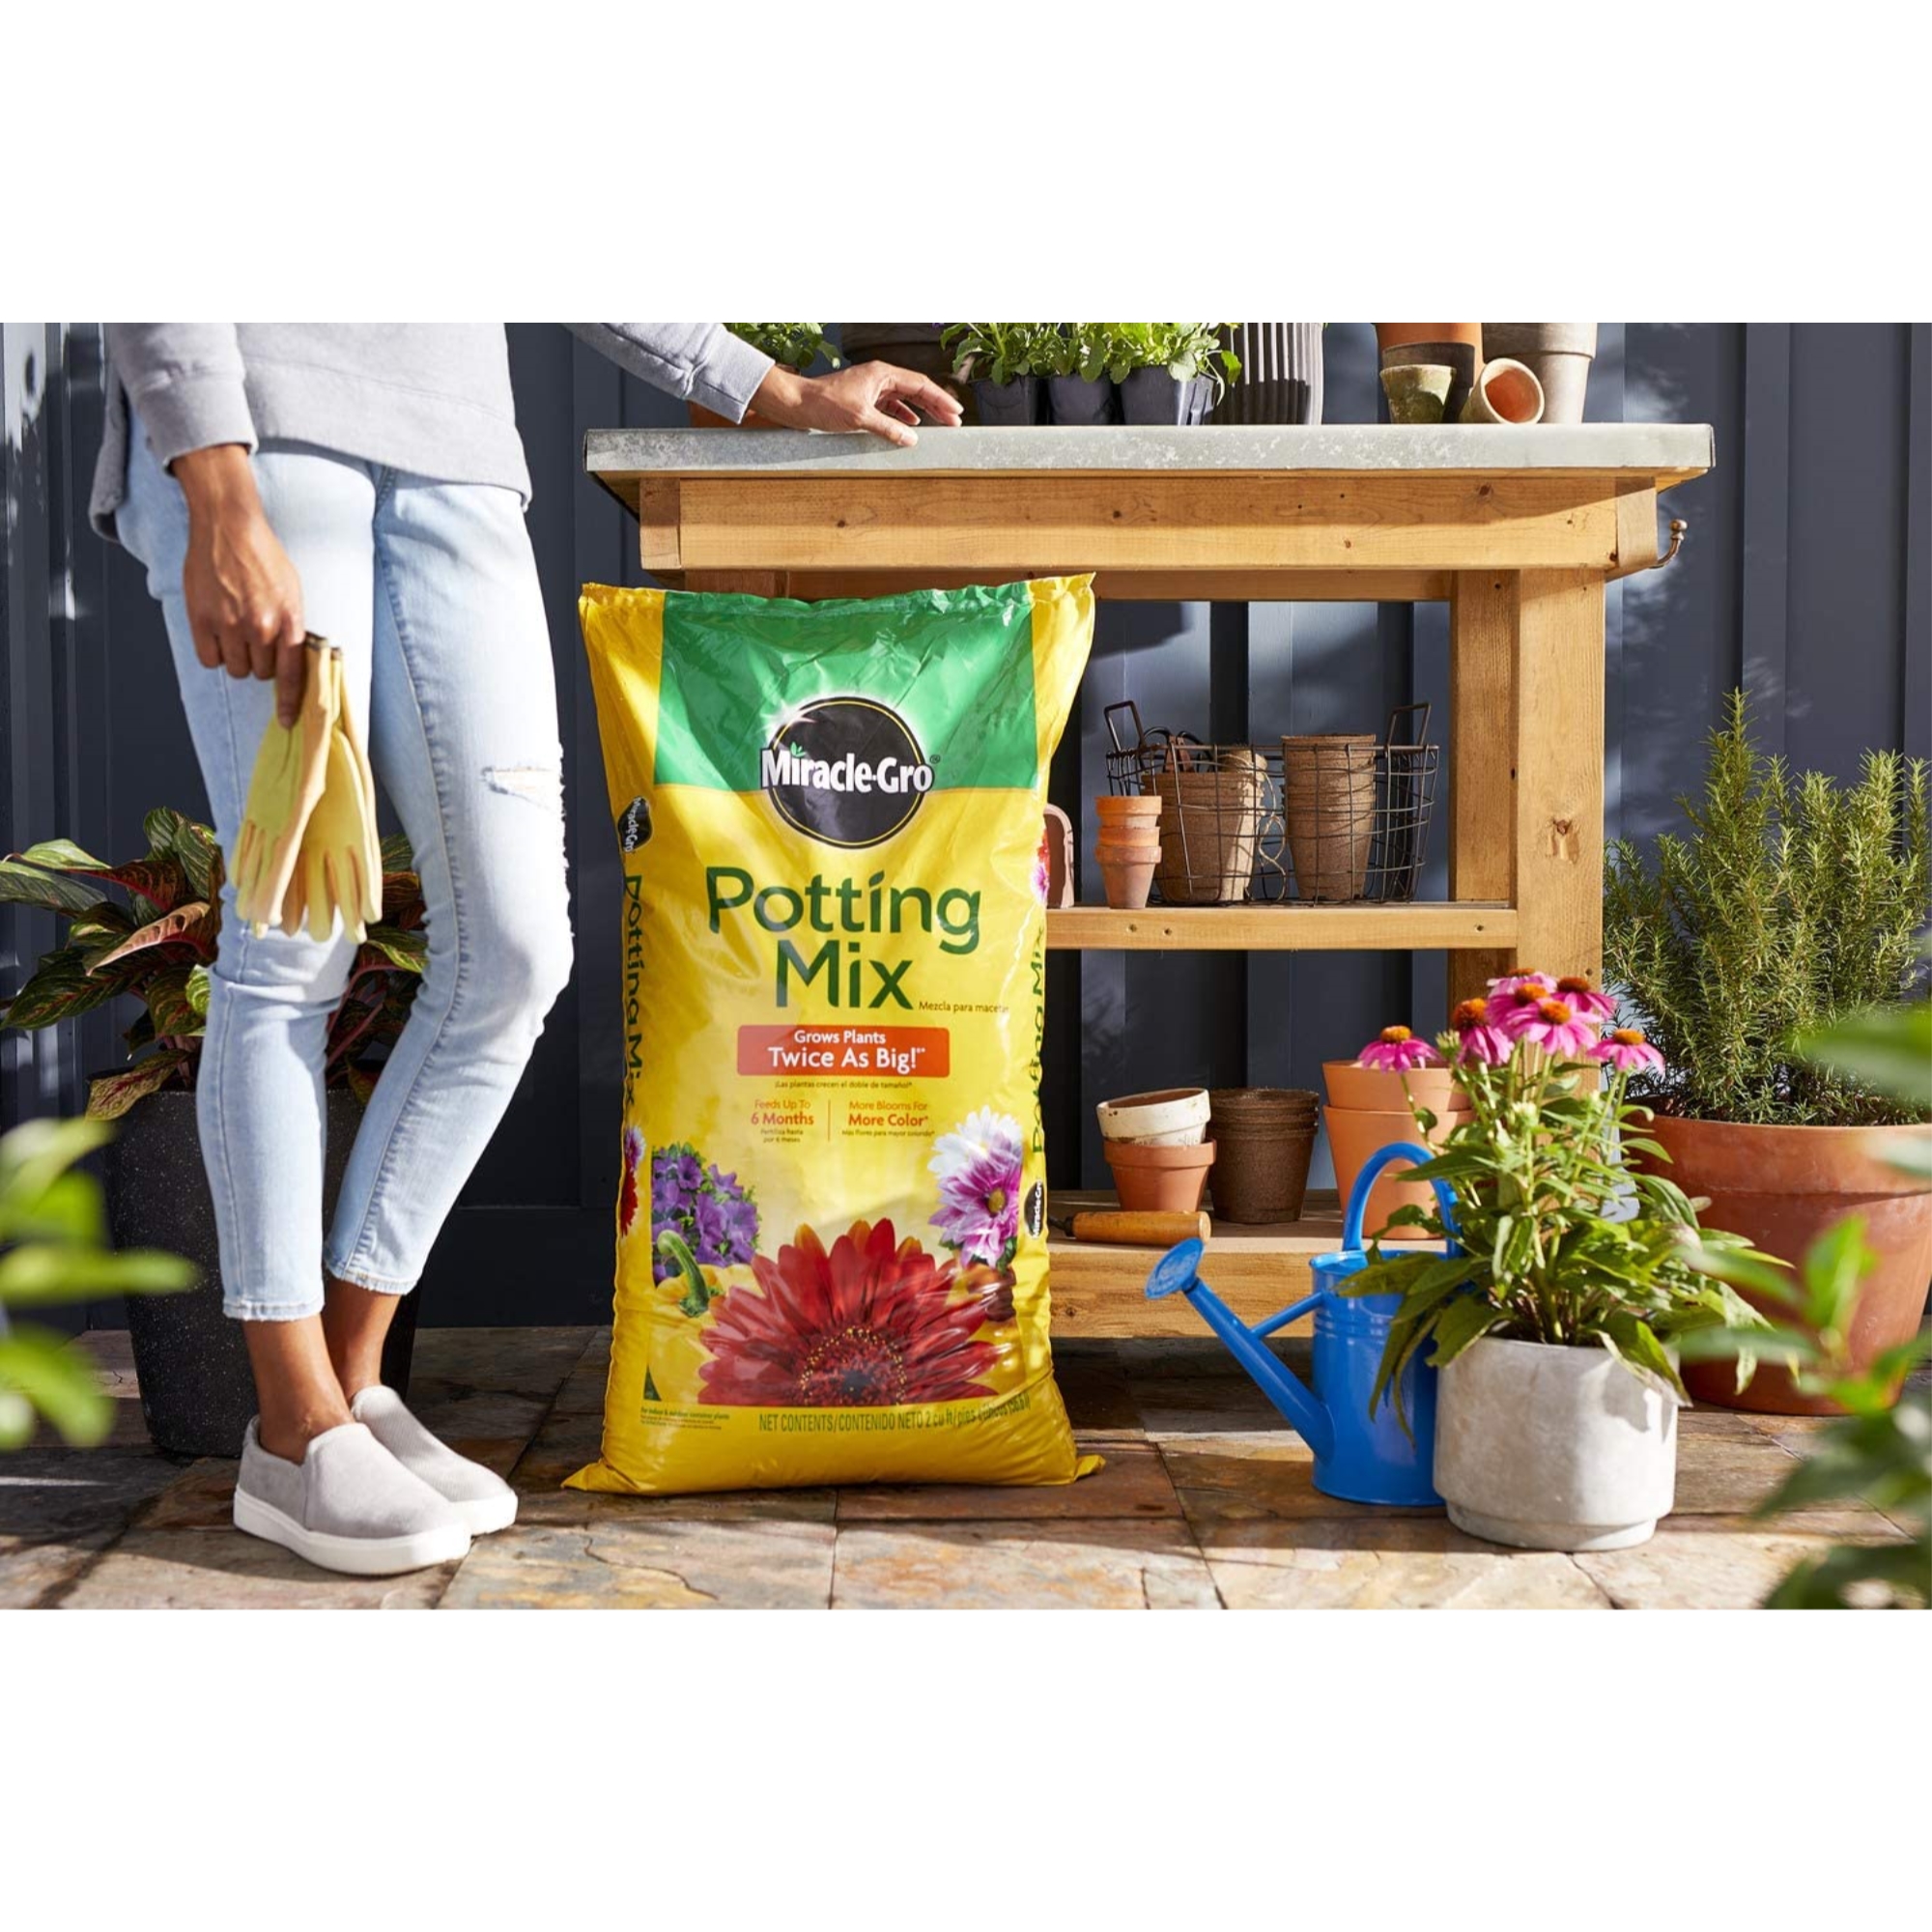 Miracle-Gro Potting Mix, 2 cu. ft., Feeds Plants up to 6 Months - image 5 of 8